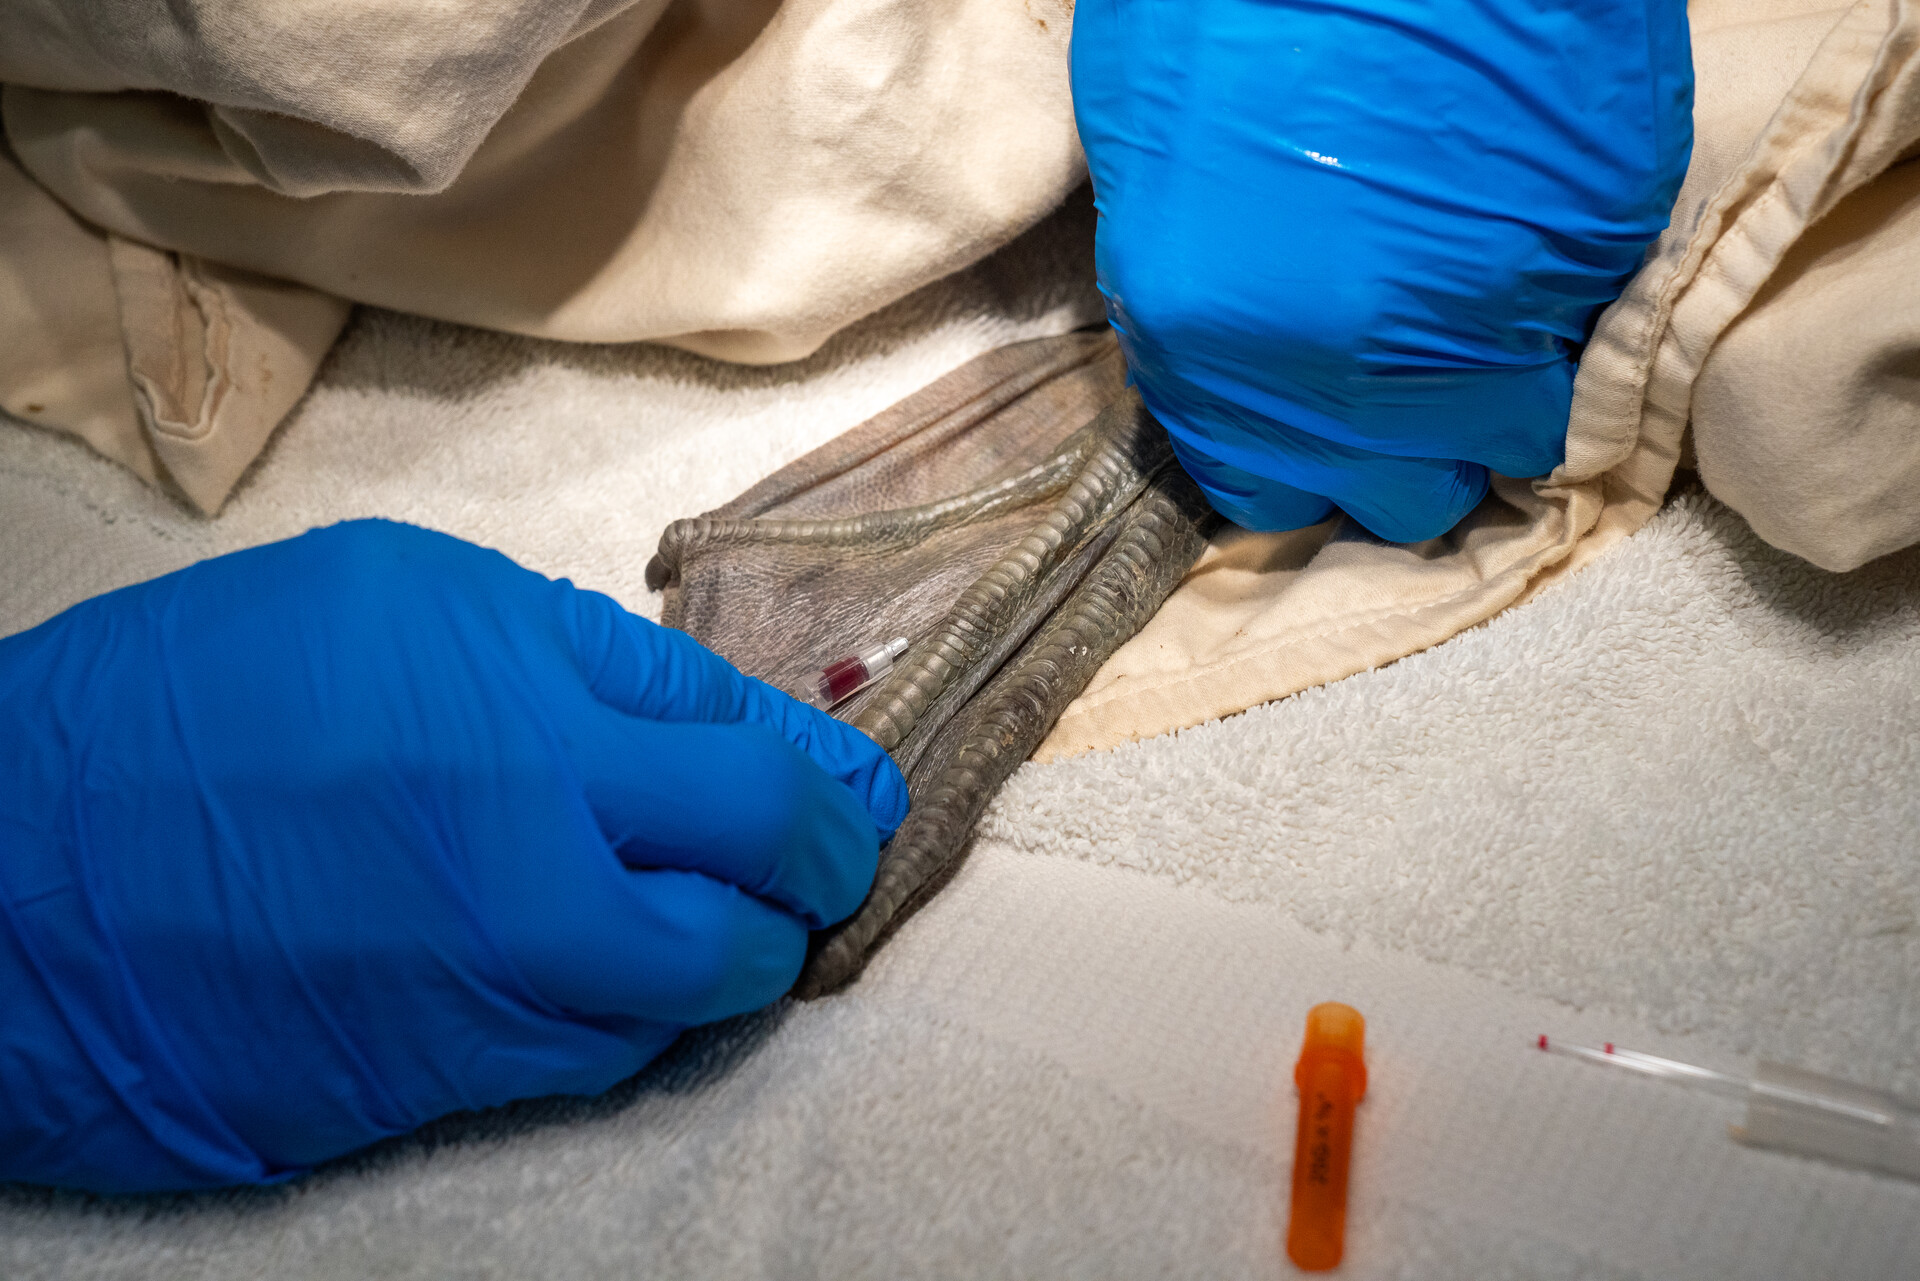 A person wearing blue gloves takes a blood sample from a leathery foot of a bird.